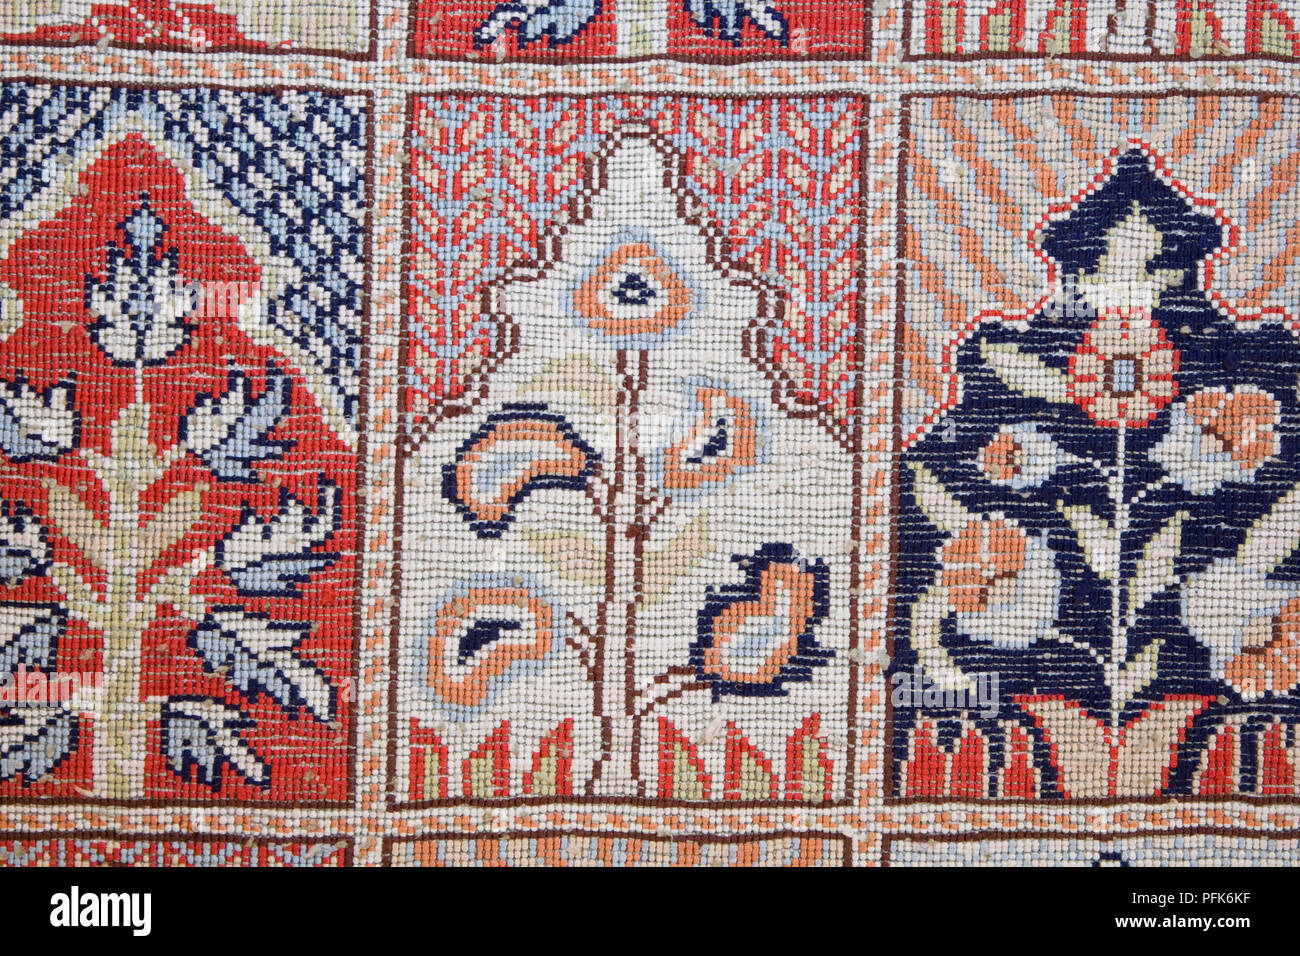 Floral patterns on a rug from Turkey, close-up Stock Photo